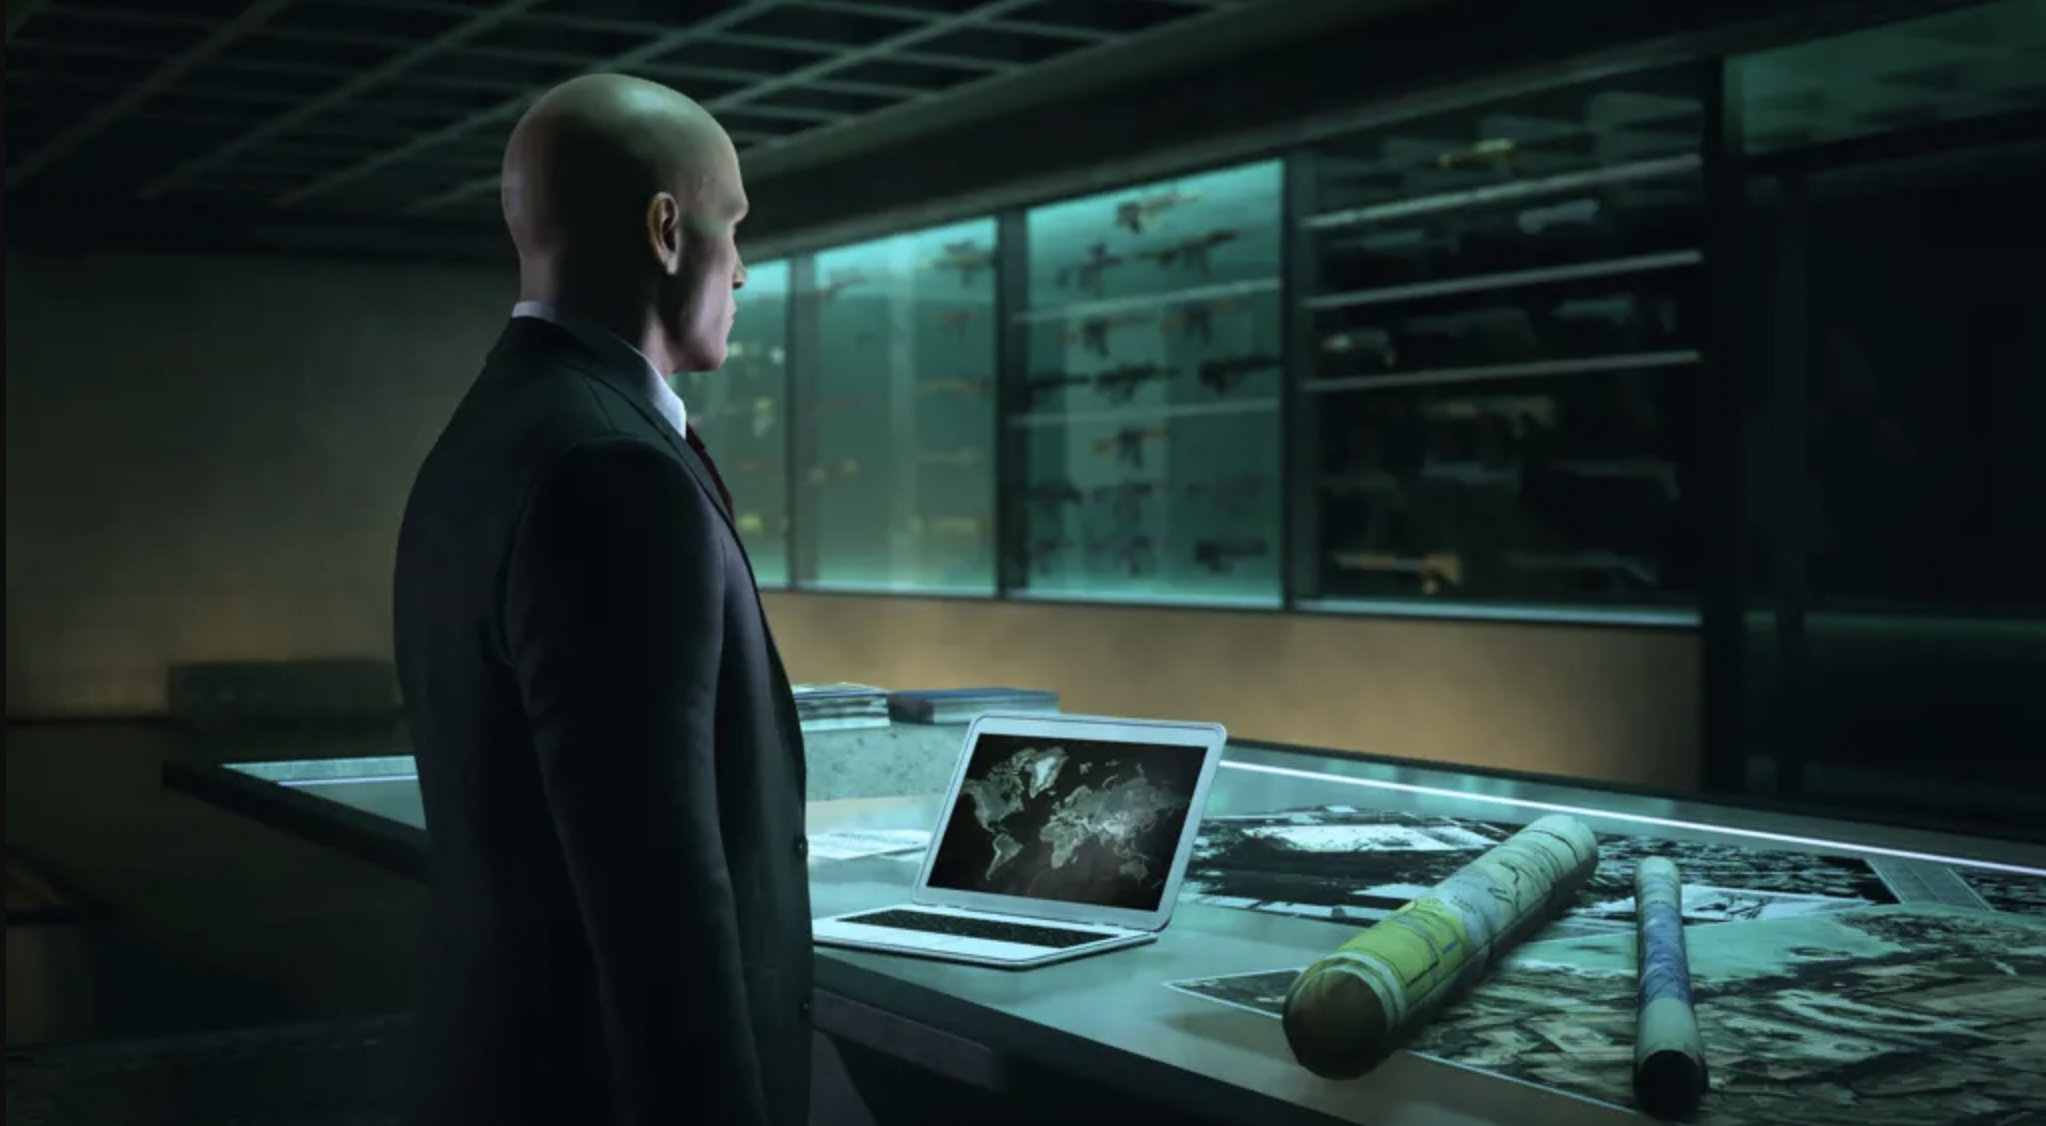 Agent 47, a bald white man in a suit, stands in front of a desk with a computer and rolled-up back. On the wall in front of him is a case full of weapons.